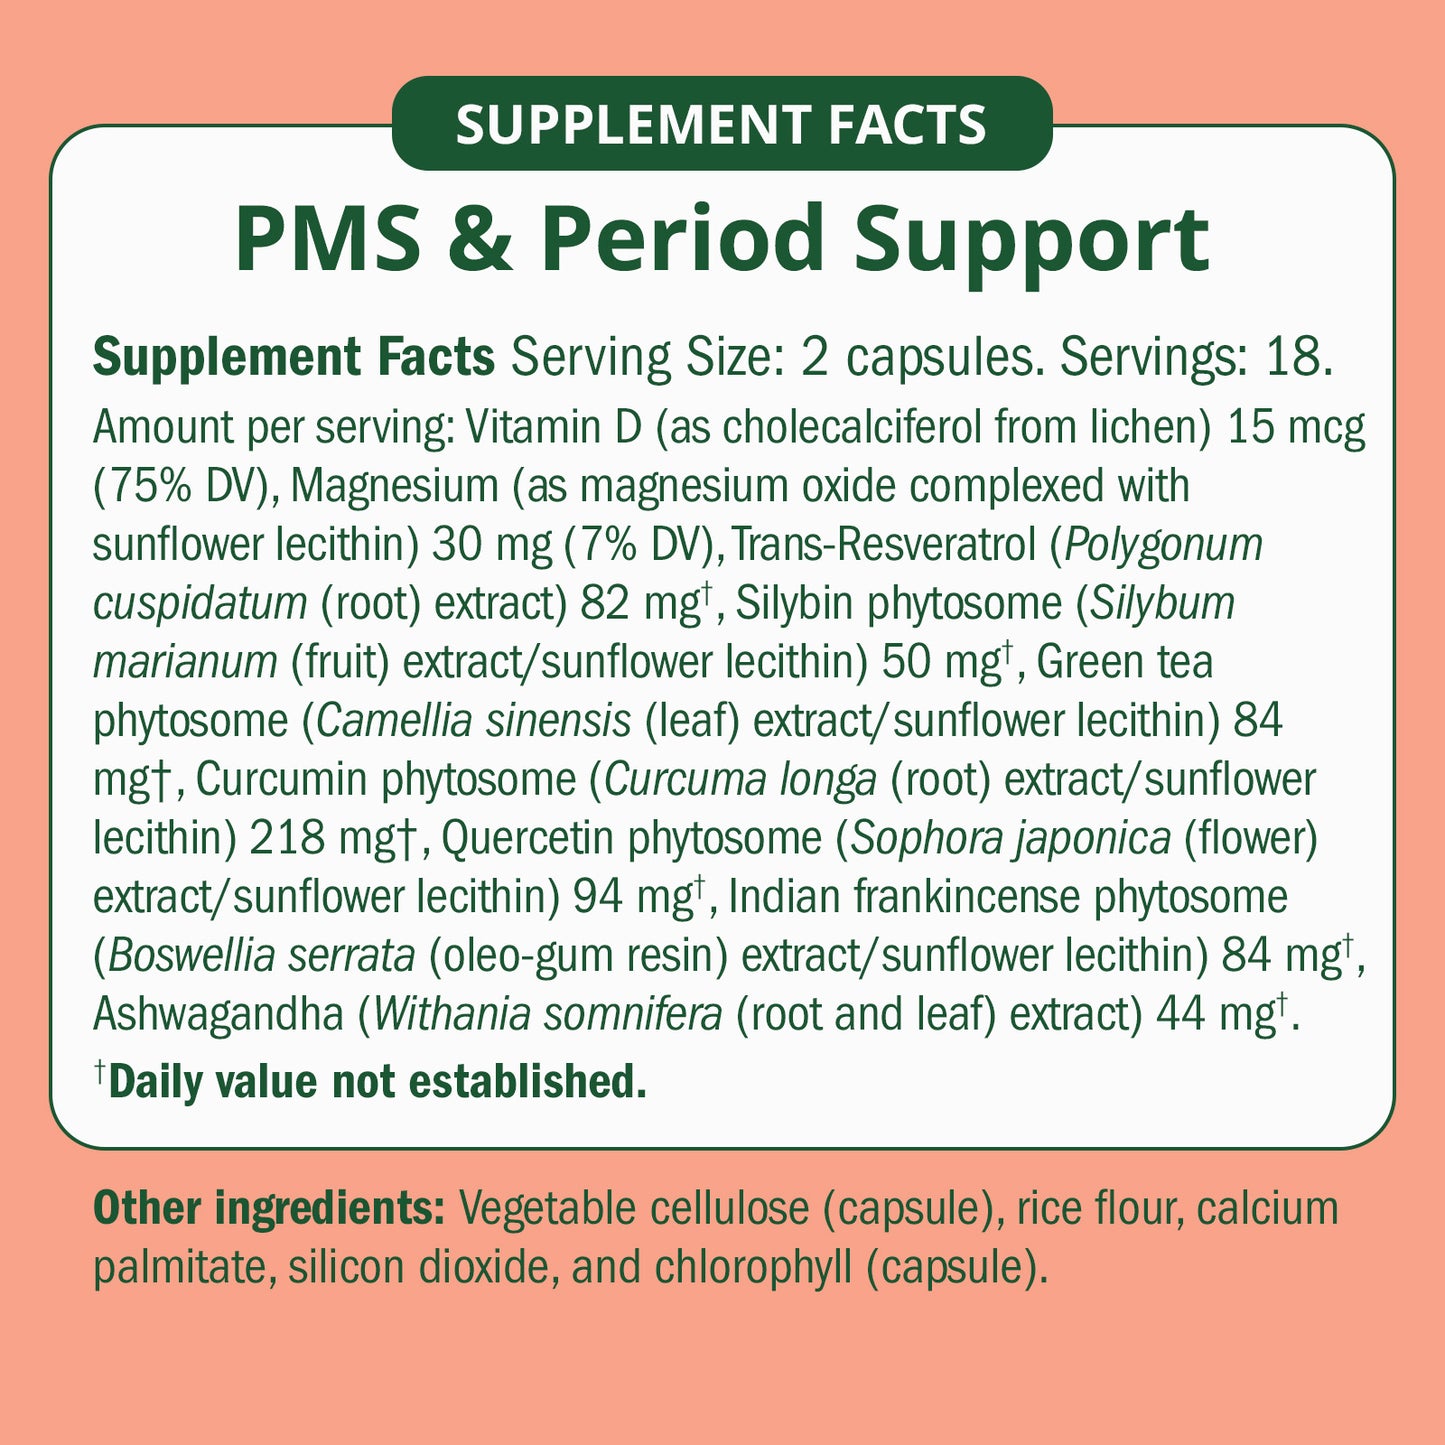 PMS & Period Support